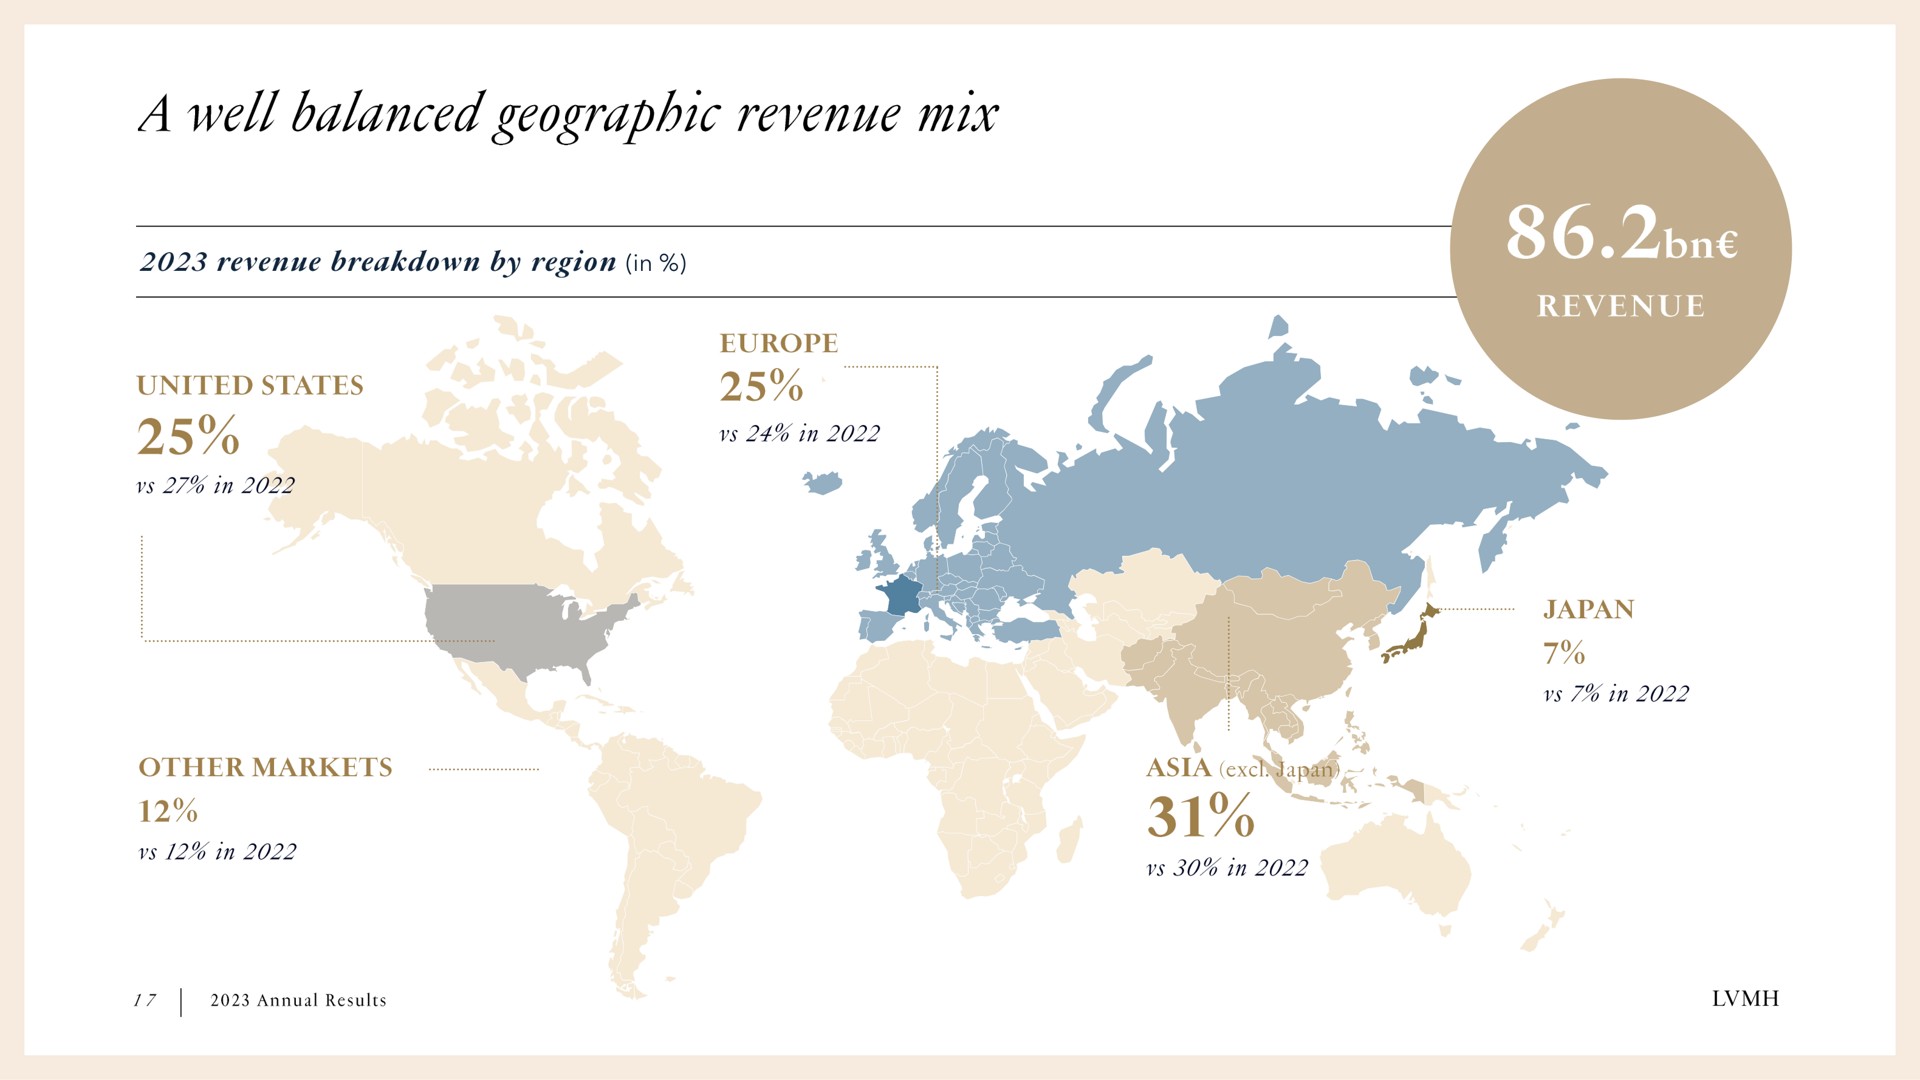 in a well balanced geographic revenue mix | LVMH